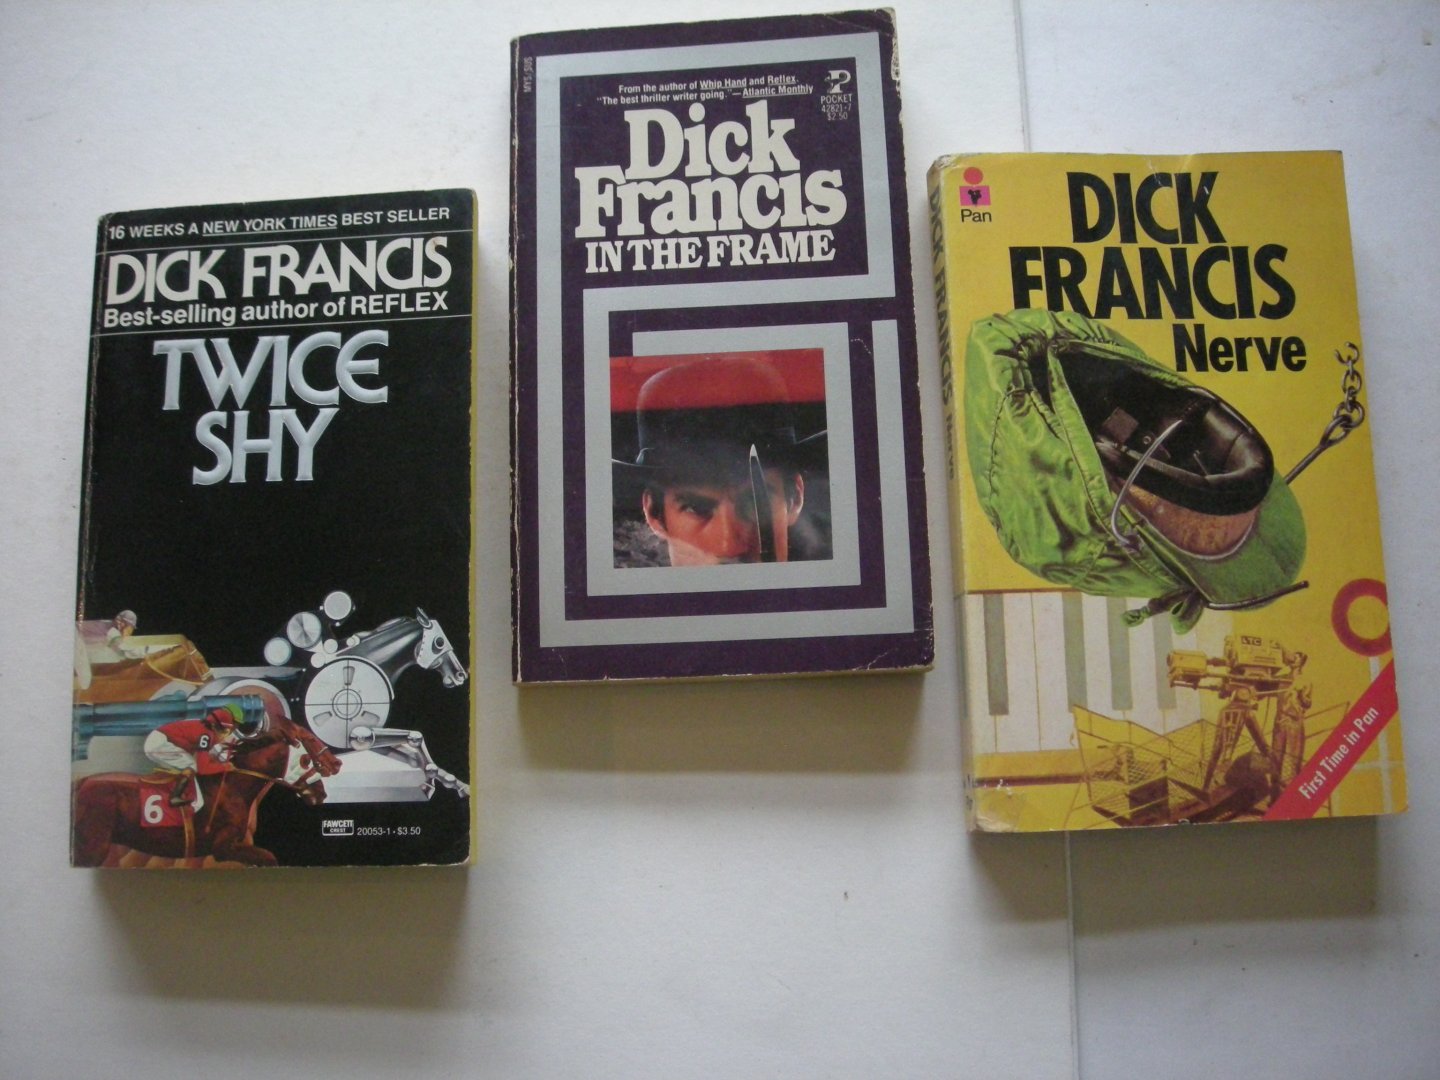 Francis, Dick - In the Frame